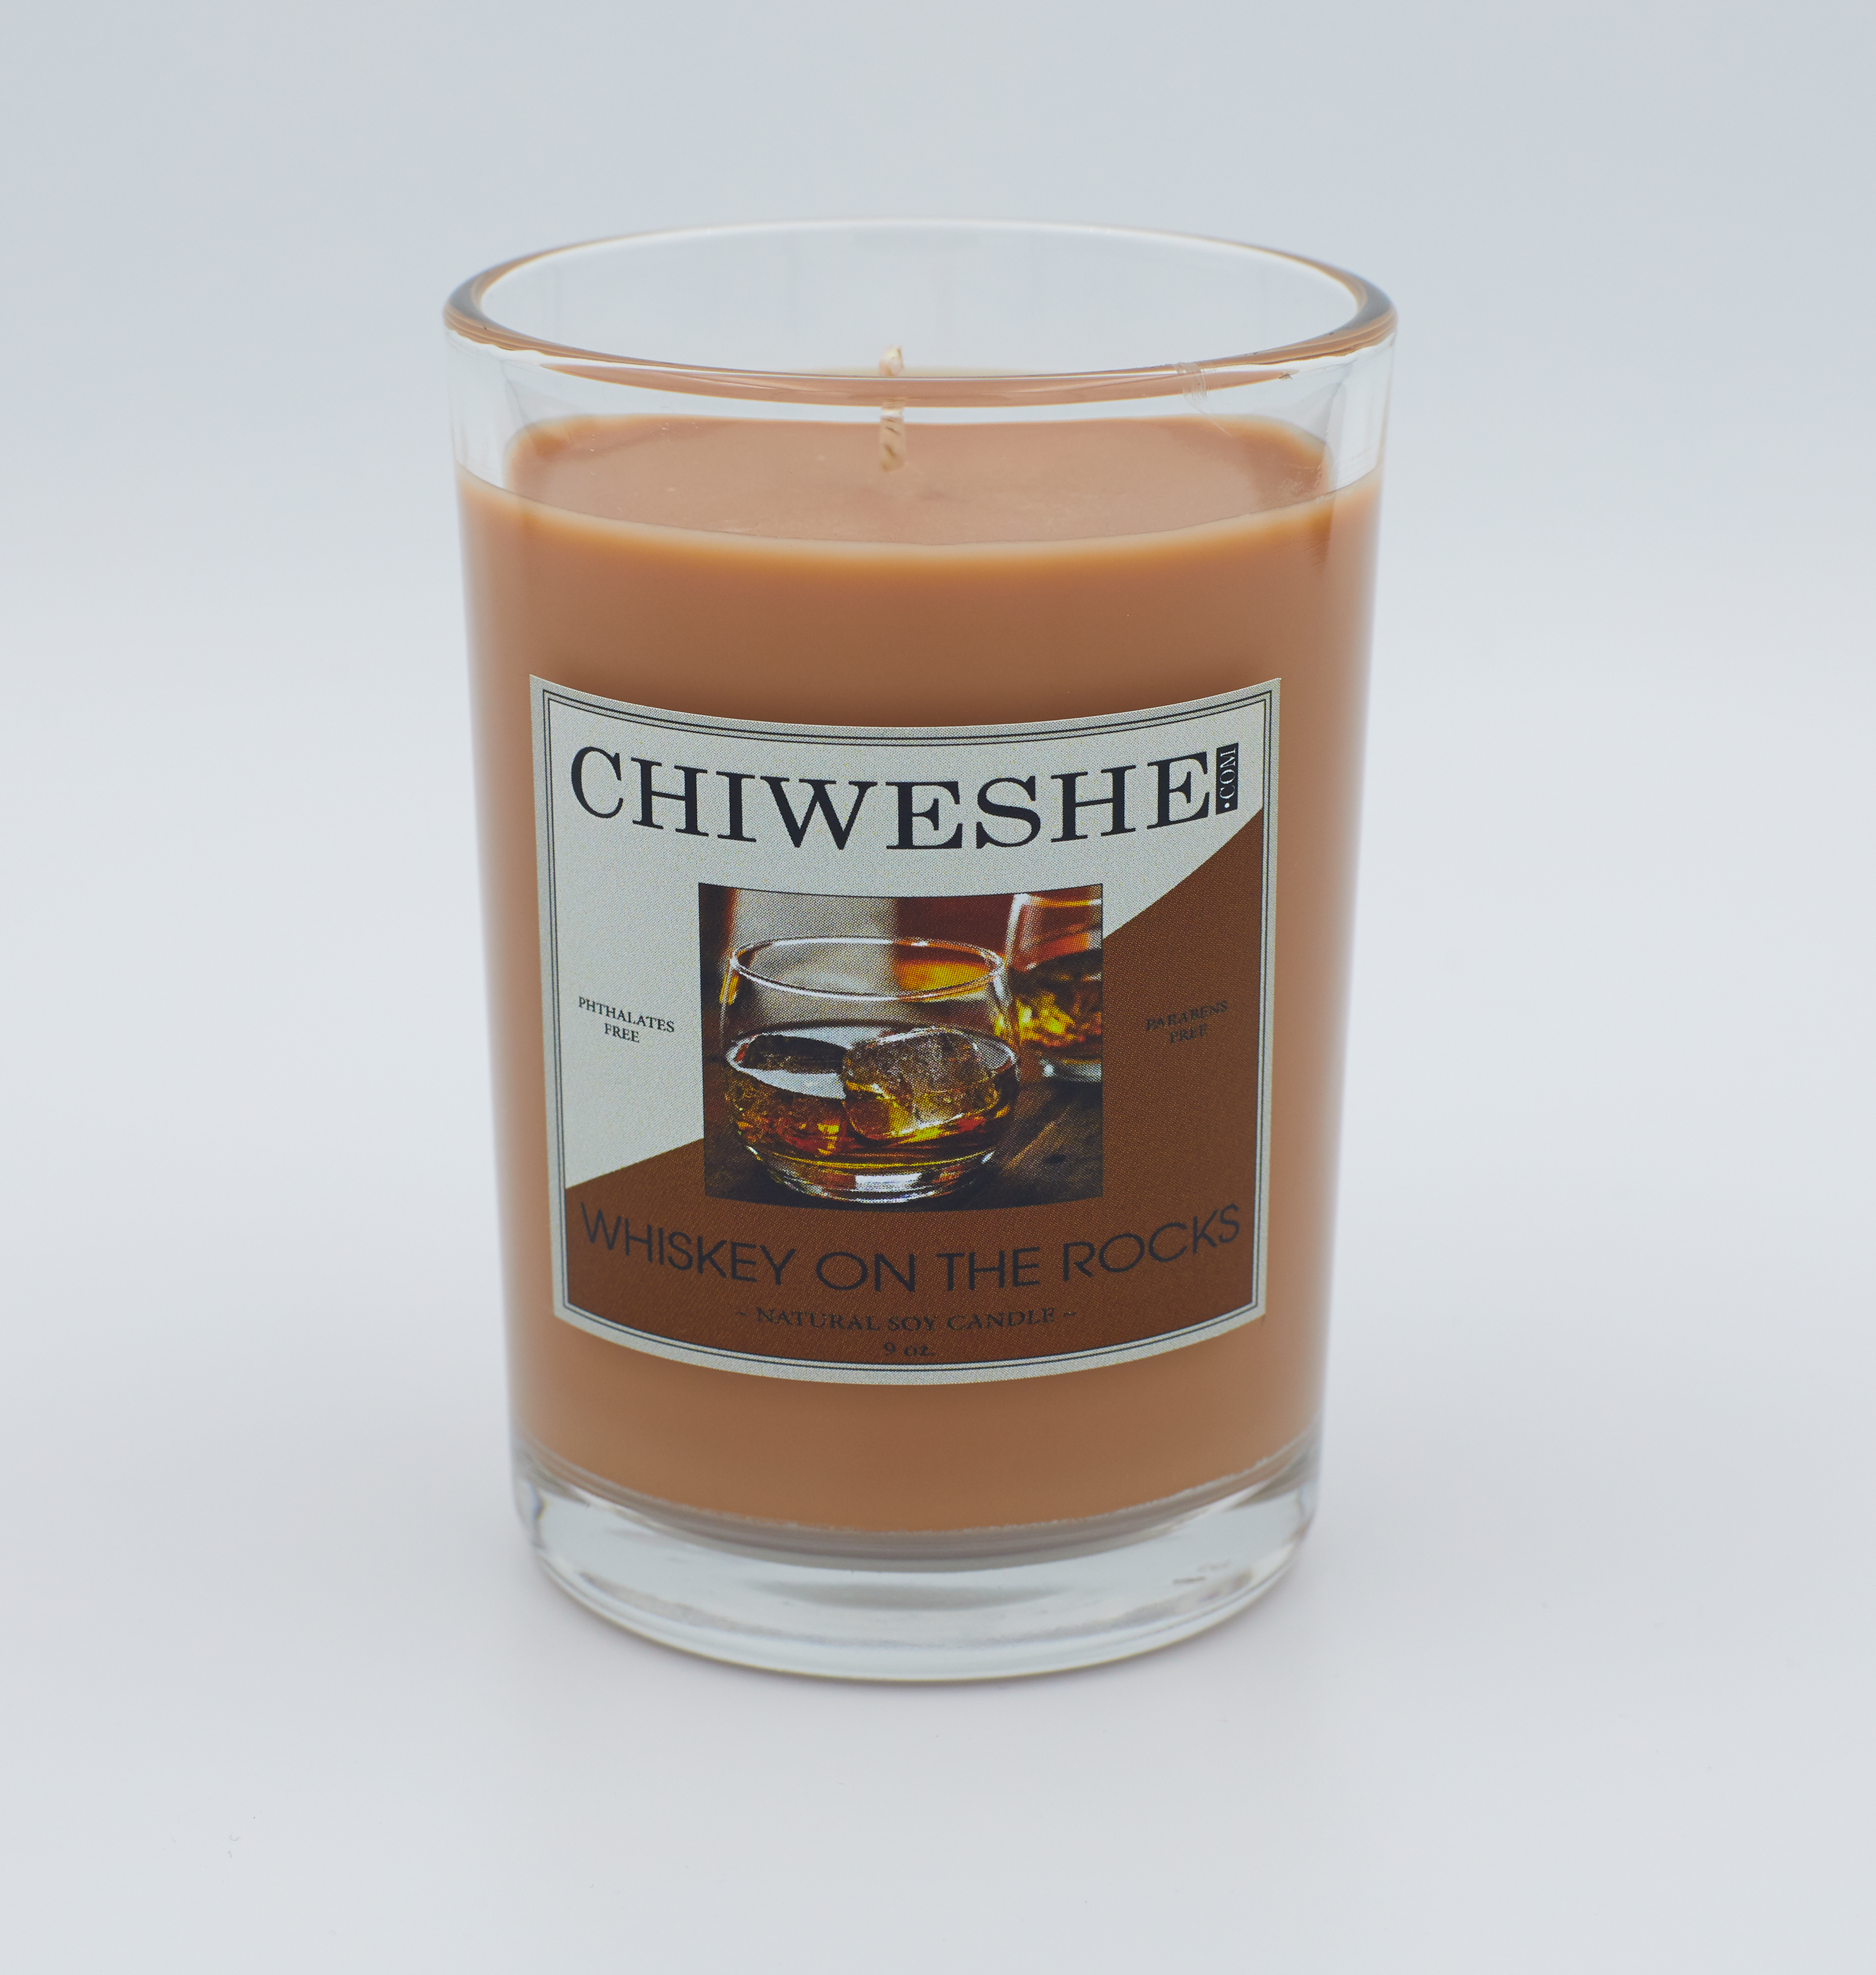 Whiskey on the Rocks Natural Soy Candle The Puebla Collection (9 oz.)